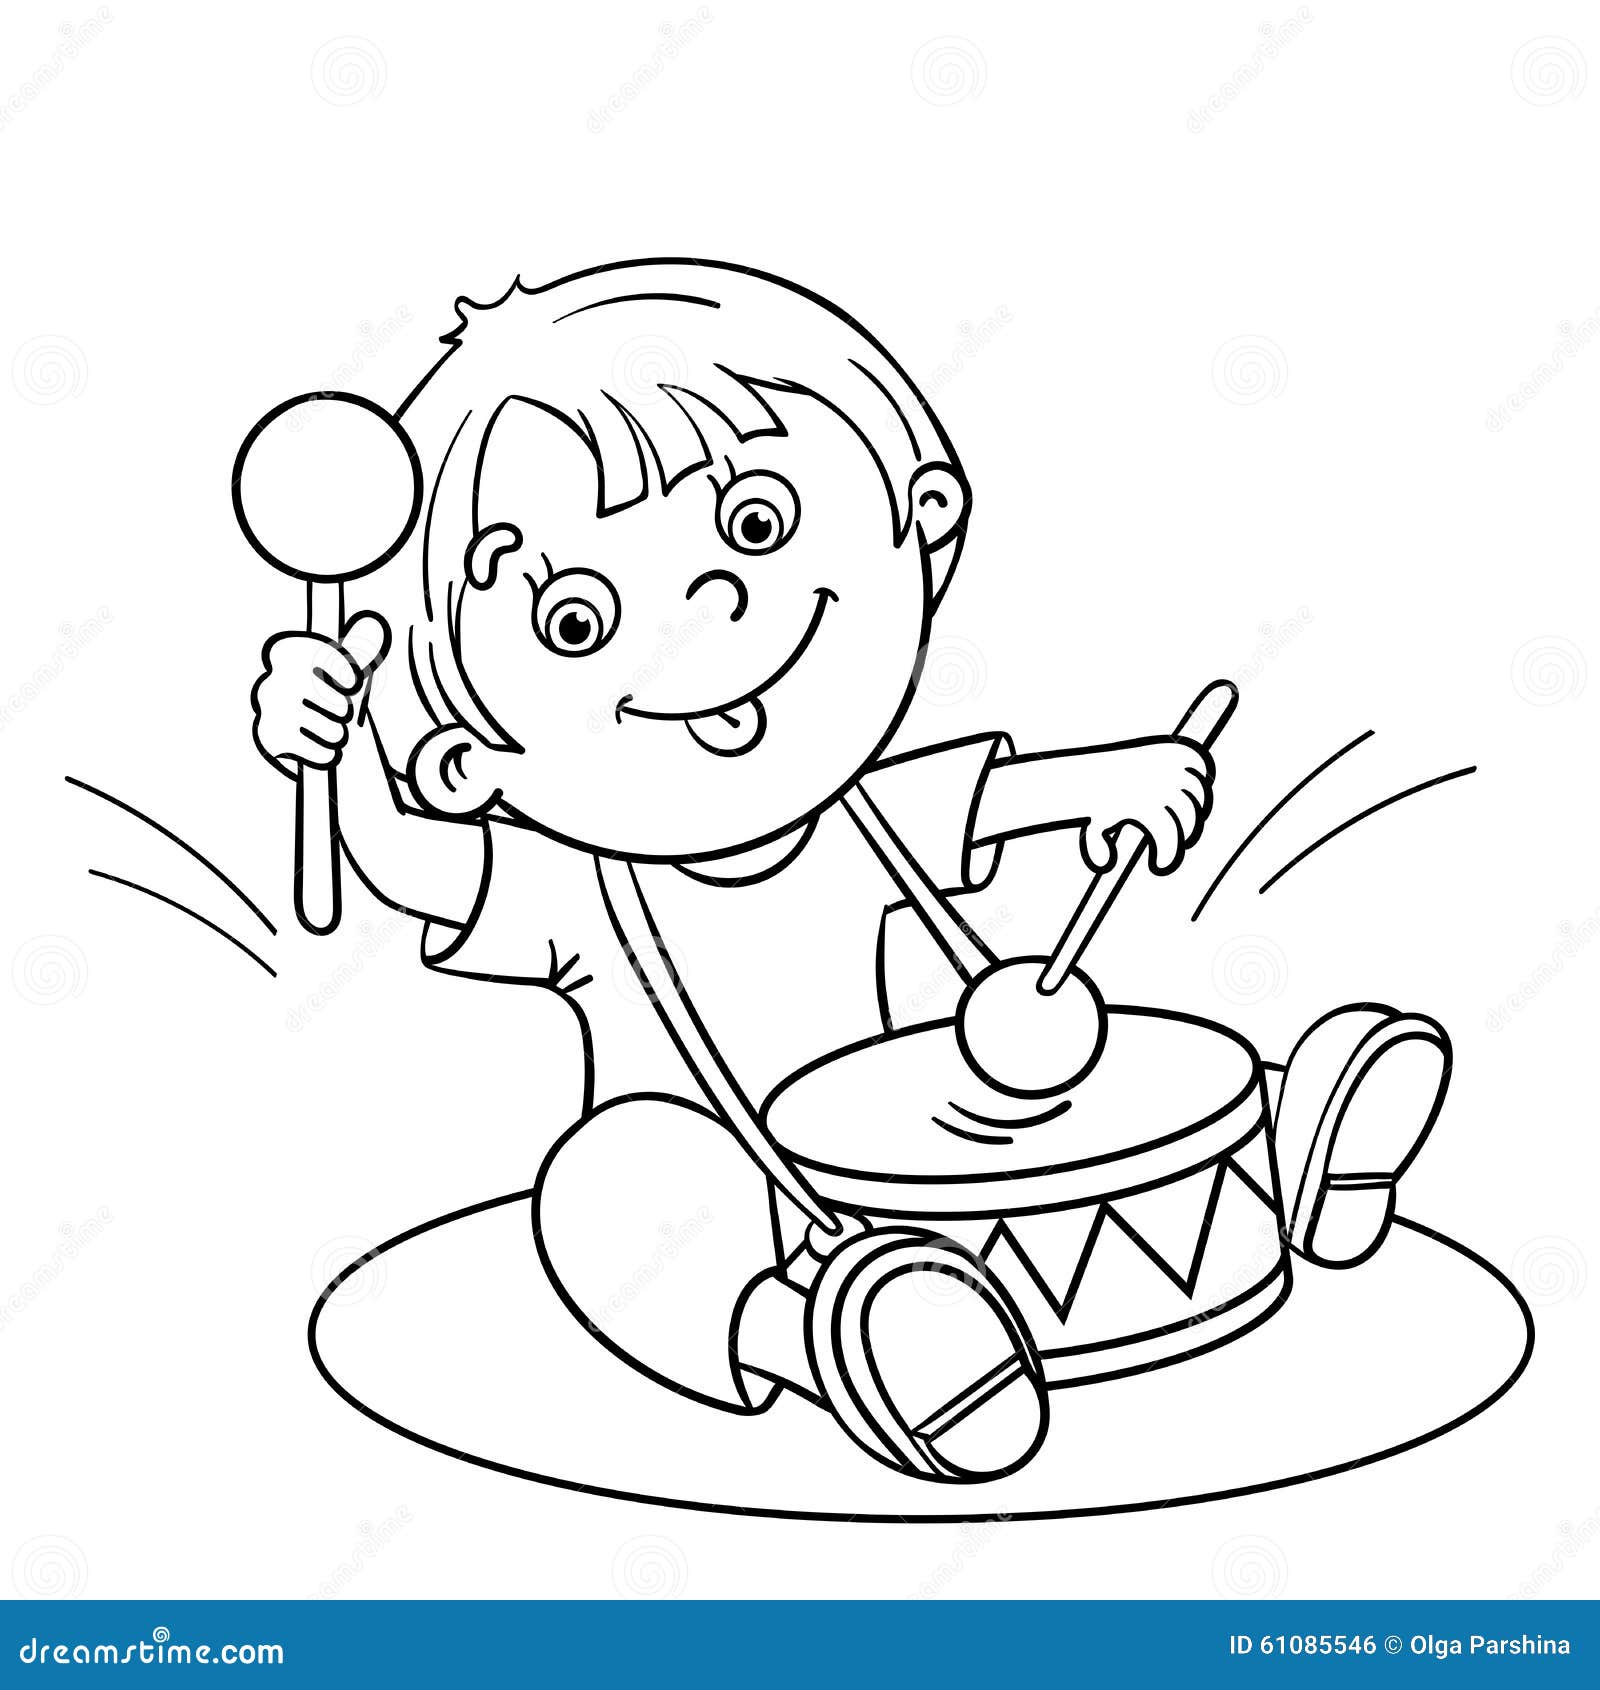 Coloring Page Outline A Cartoon Boy Playing The Drum Illustration Megapixl